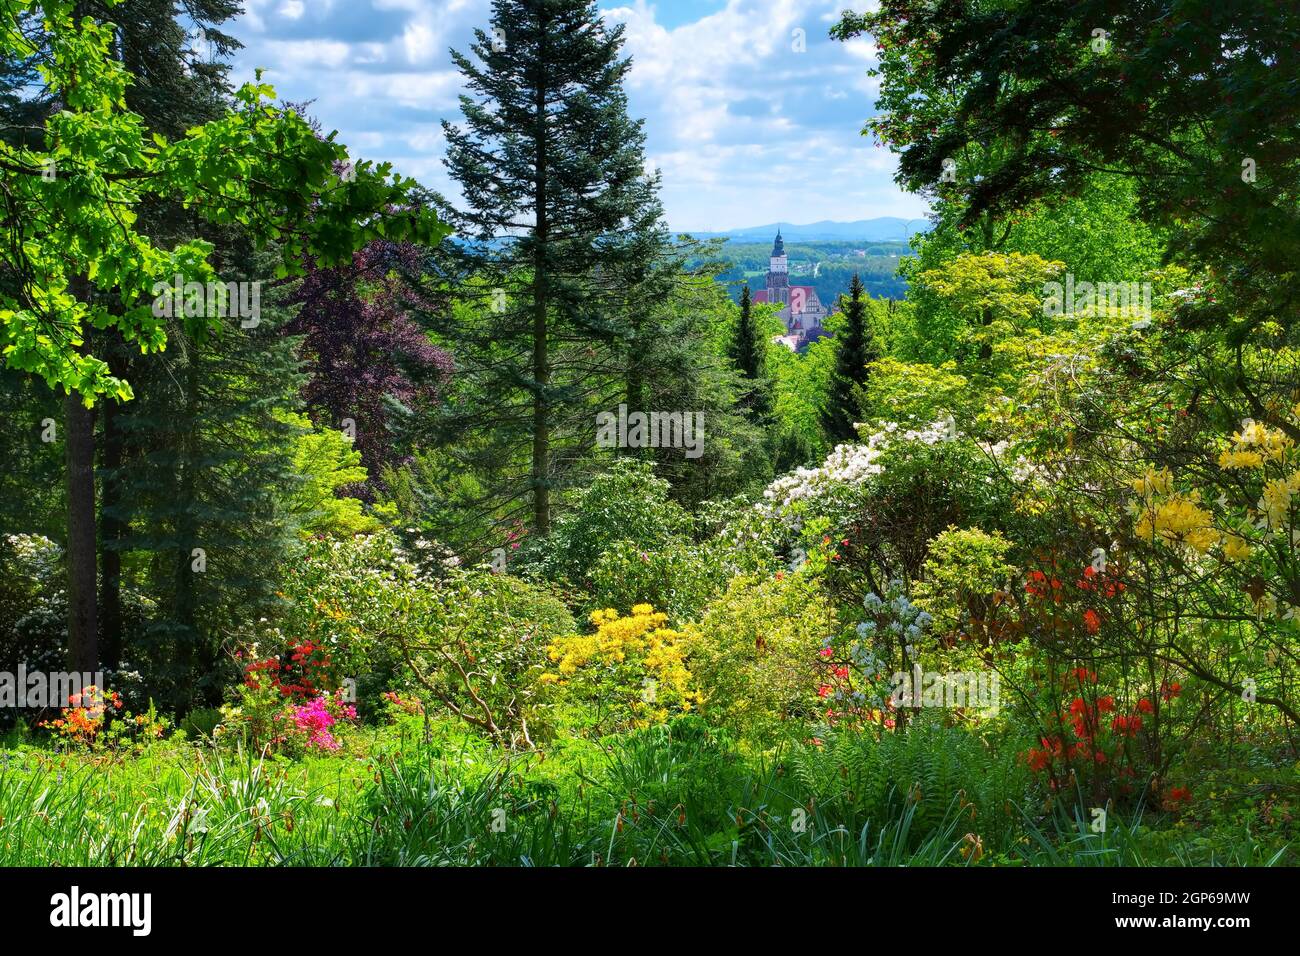 View from the mountain Hutberg during the flowering of the rhododendron, Kamenz in Saxony, Germany Stock Photo